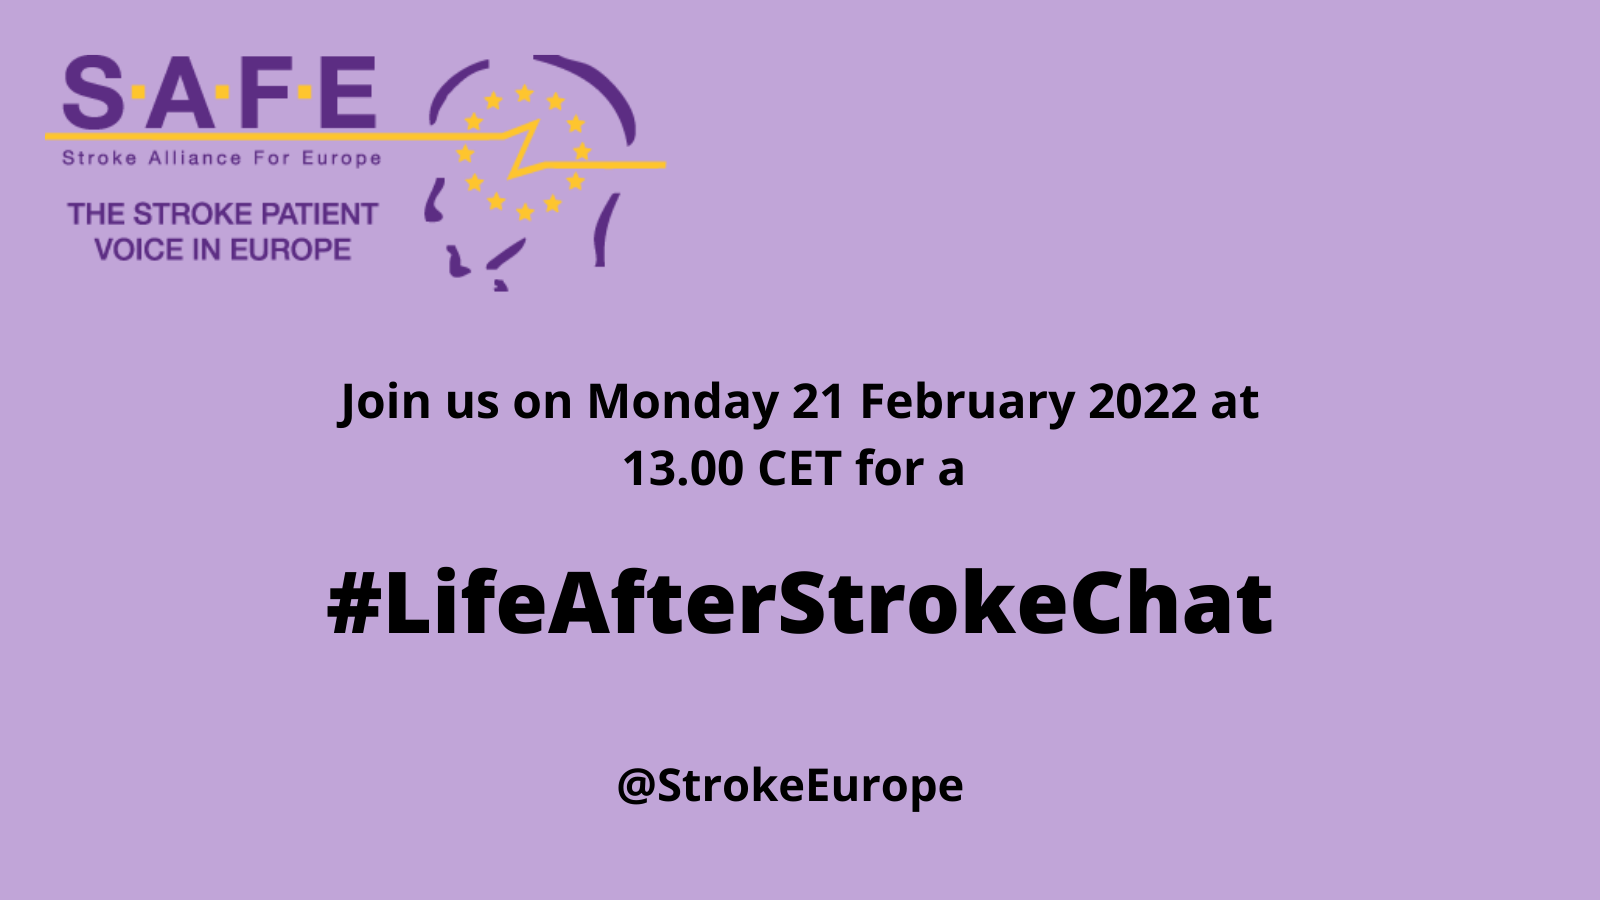 Our first Tweetchat launched – #LifeAfterStrokeChat